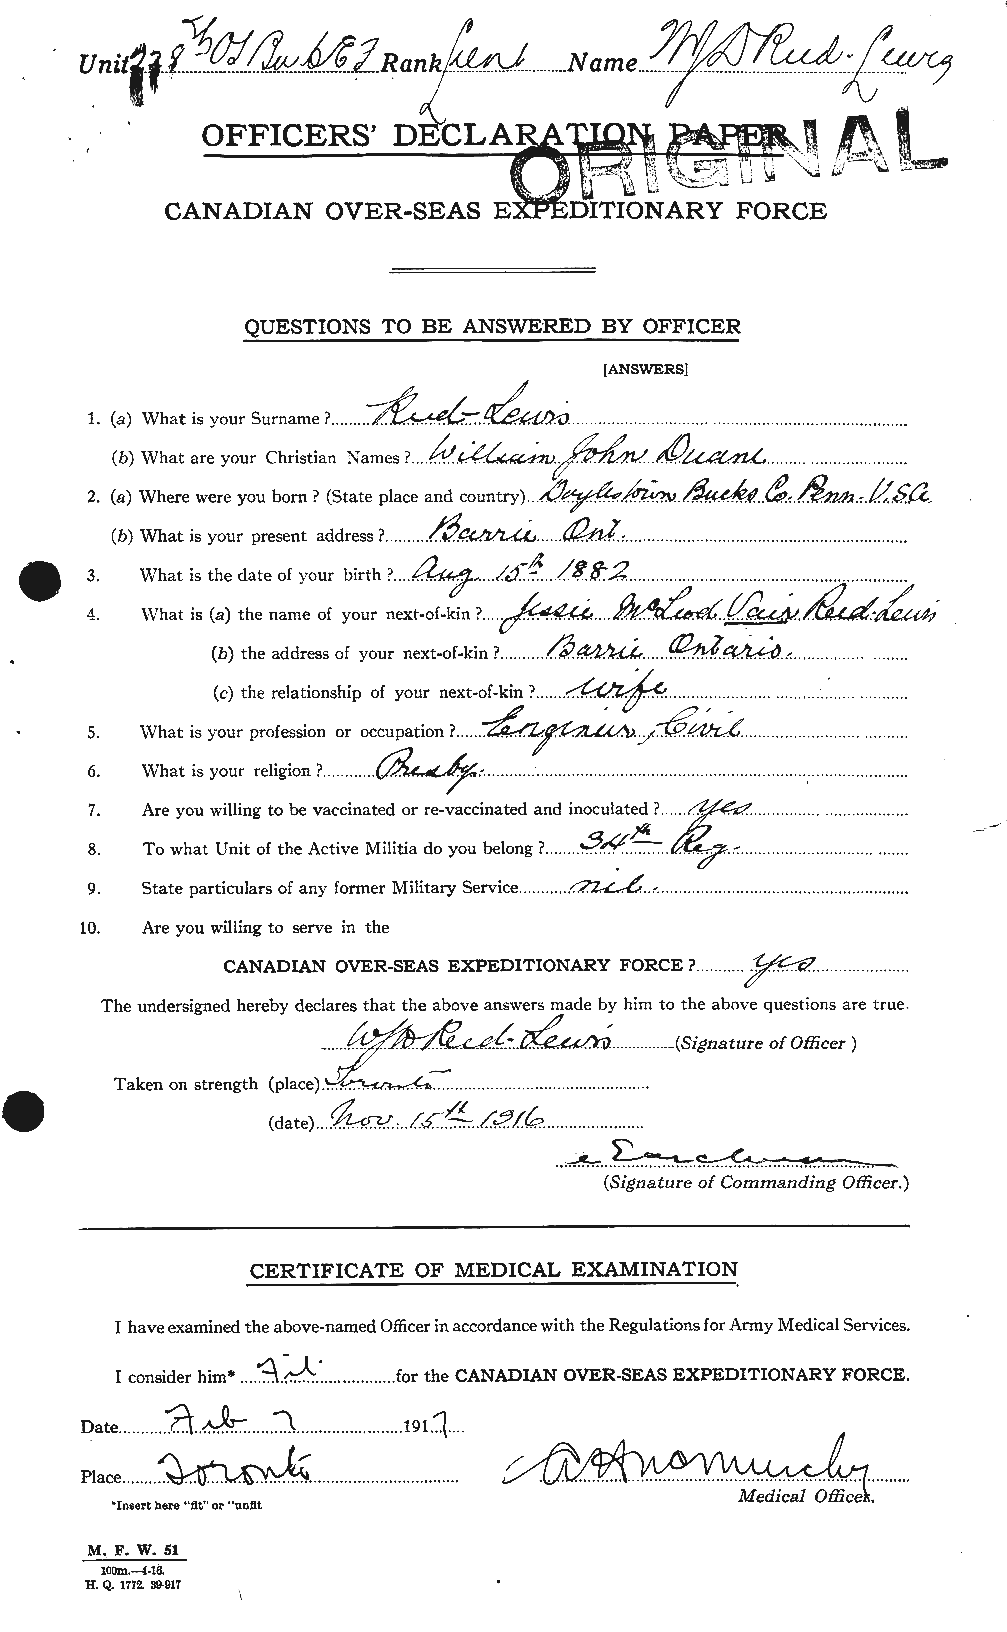 Personnel Records of the First World War - CEF 596563a